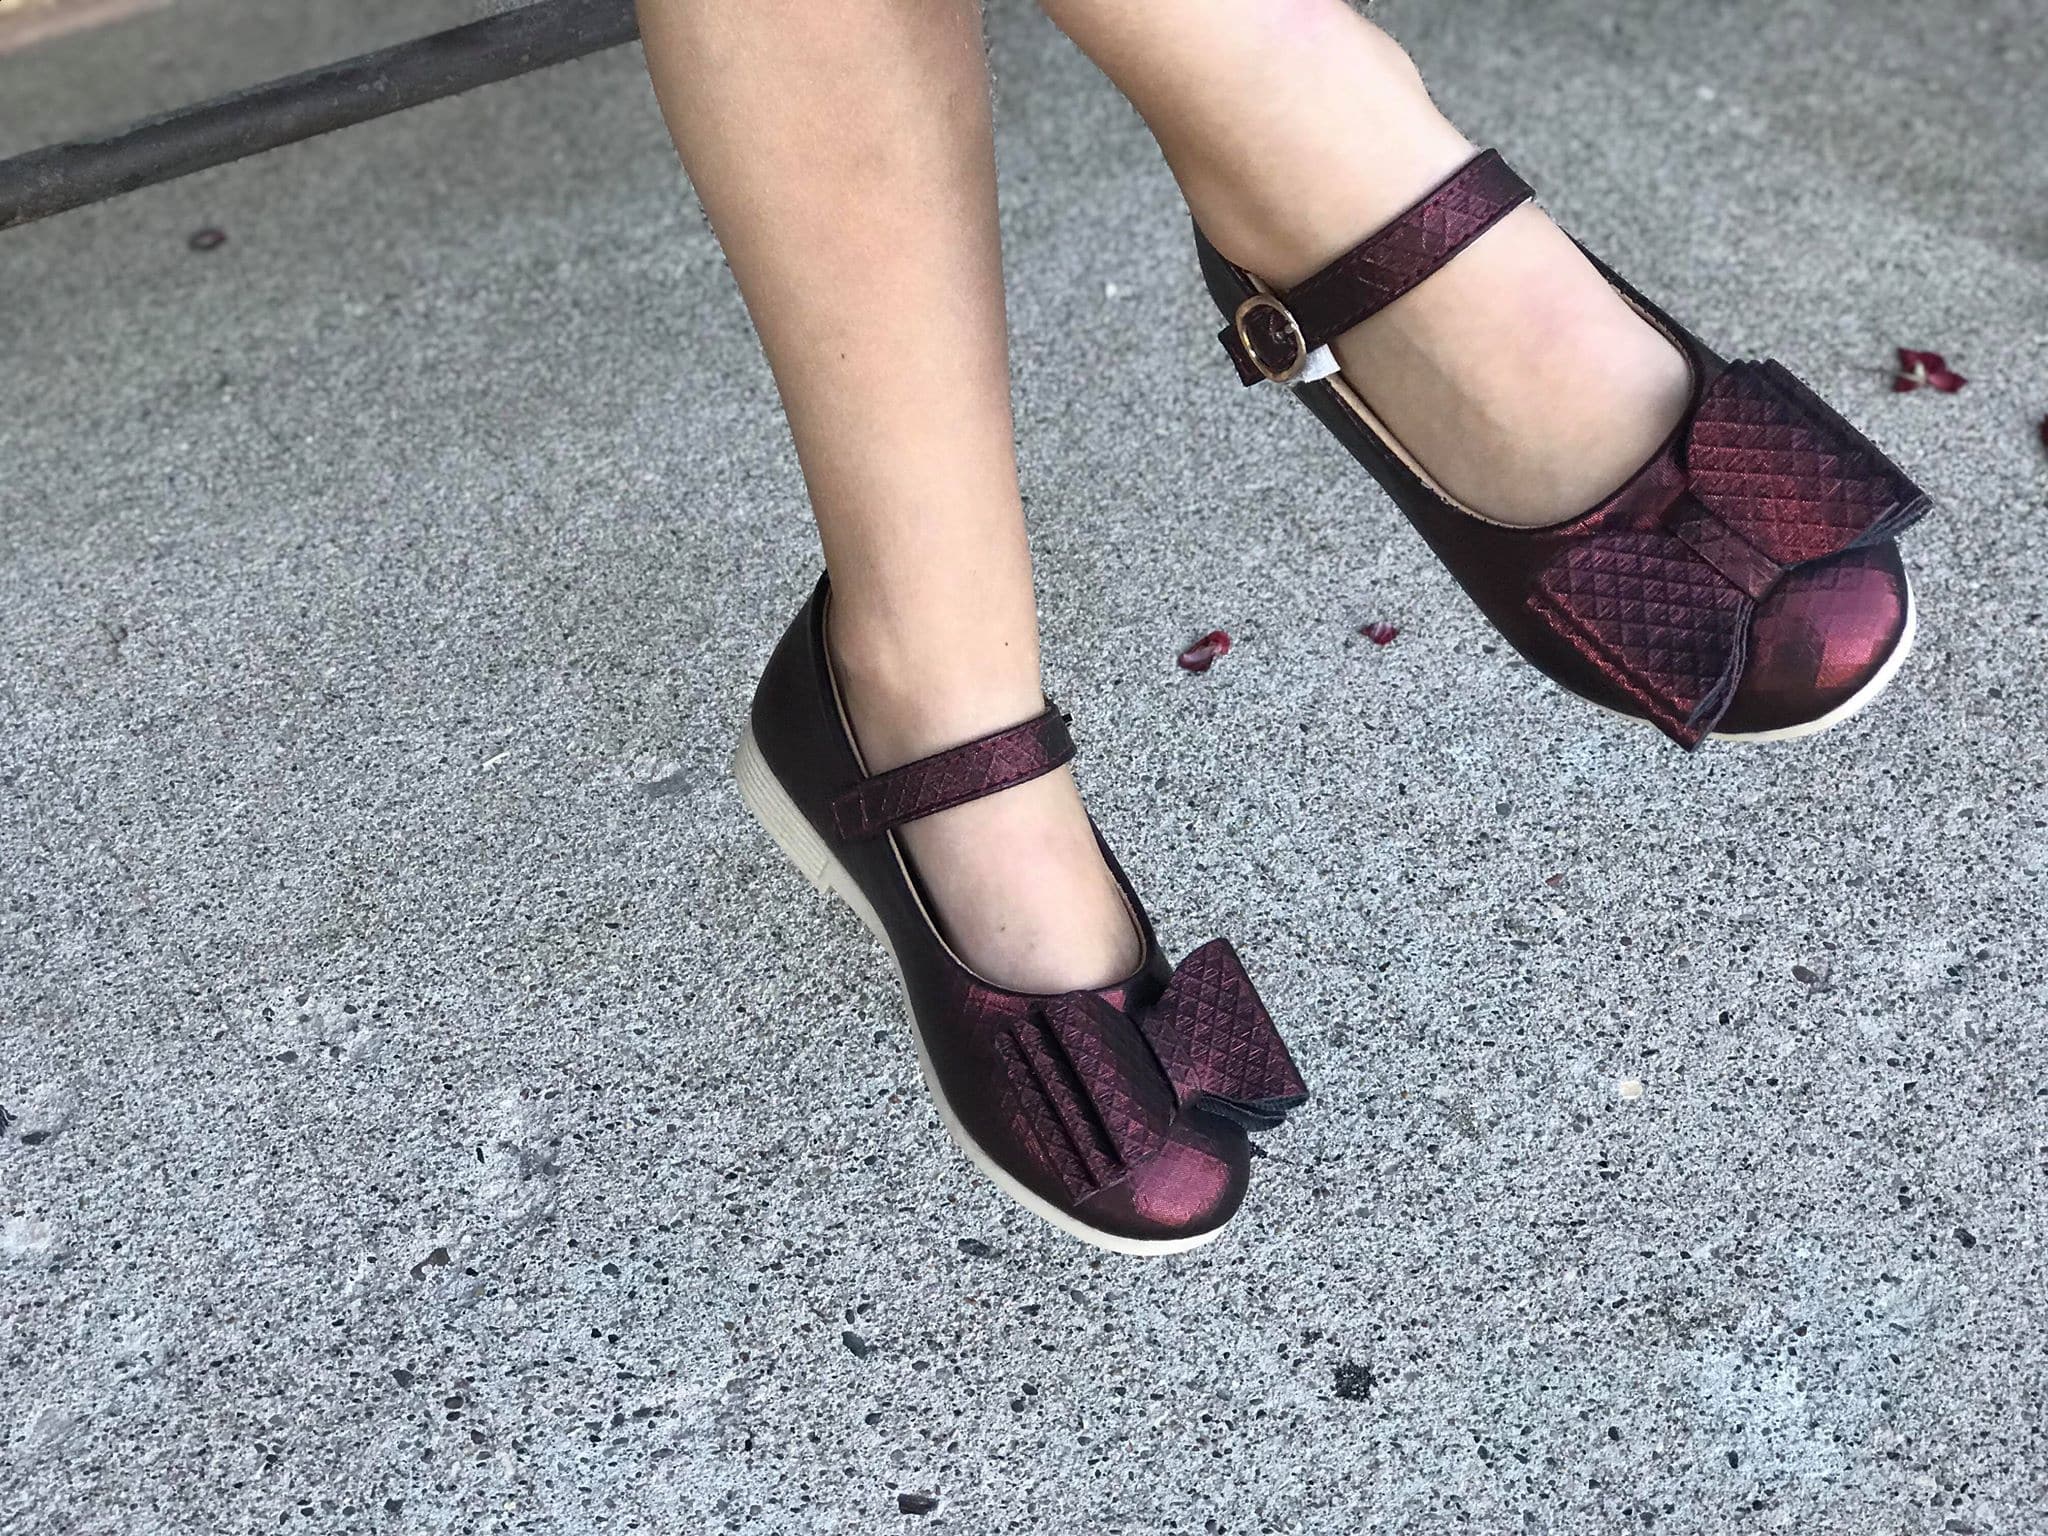 [Black Cherry] Bow Shoes